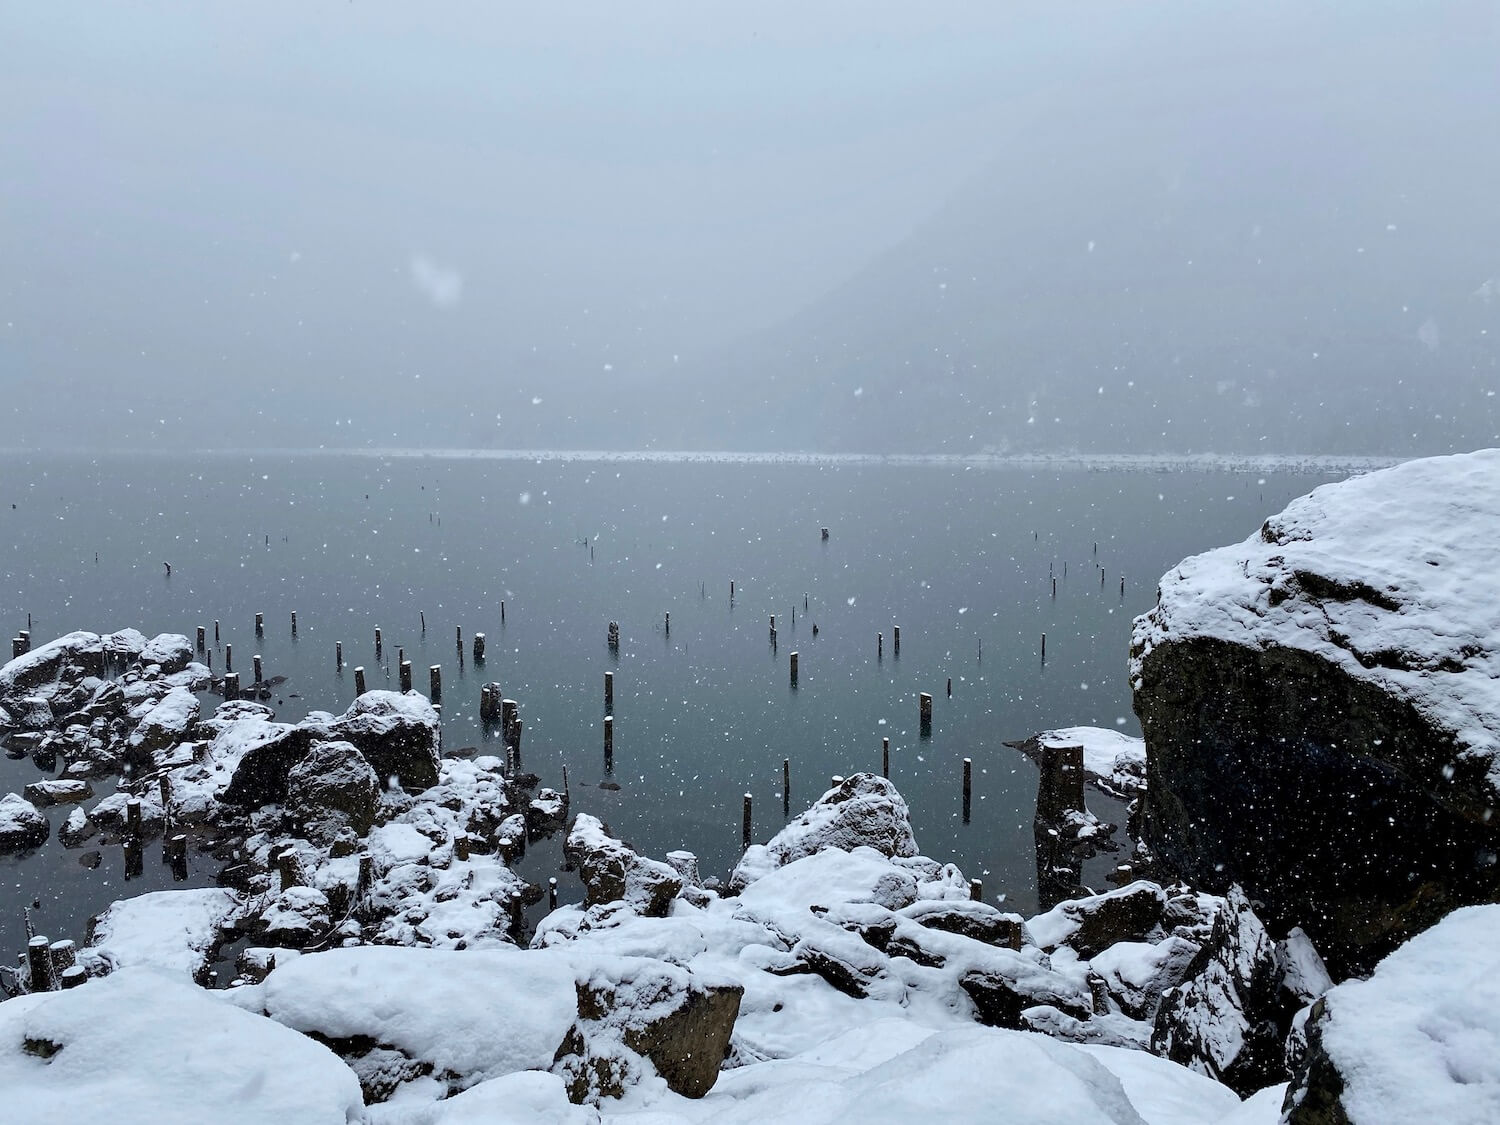 A beautiful lake shot with snow falling onto a lake with tree stumps popping out. In the foreground are rocks covered in snow and the faint background is a hill shrouded in snowy mist.